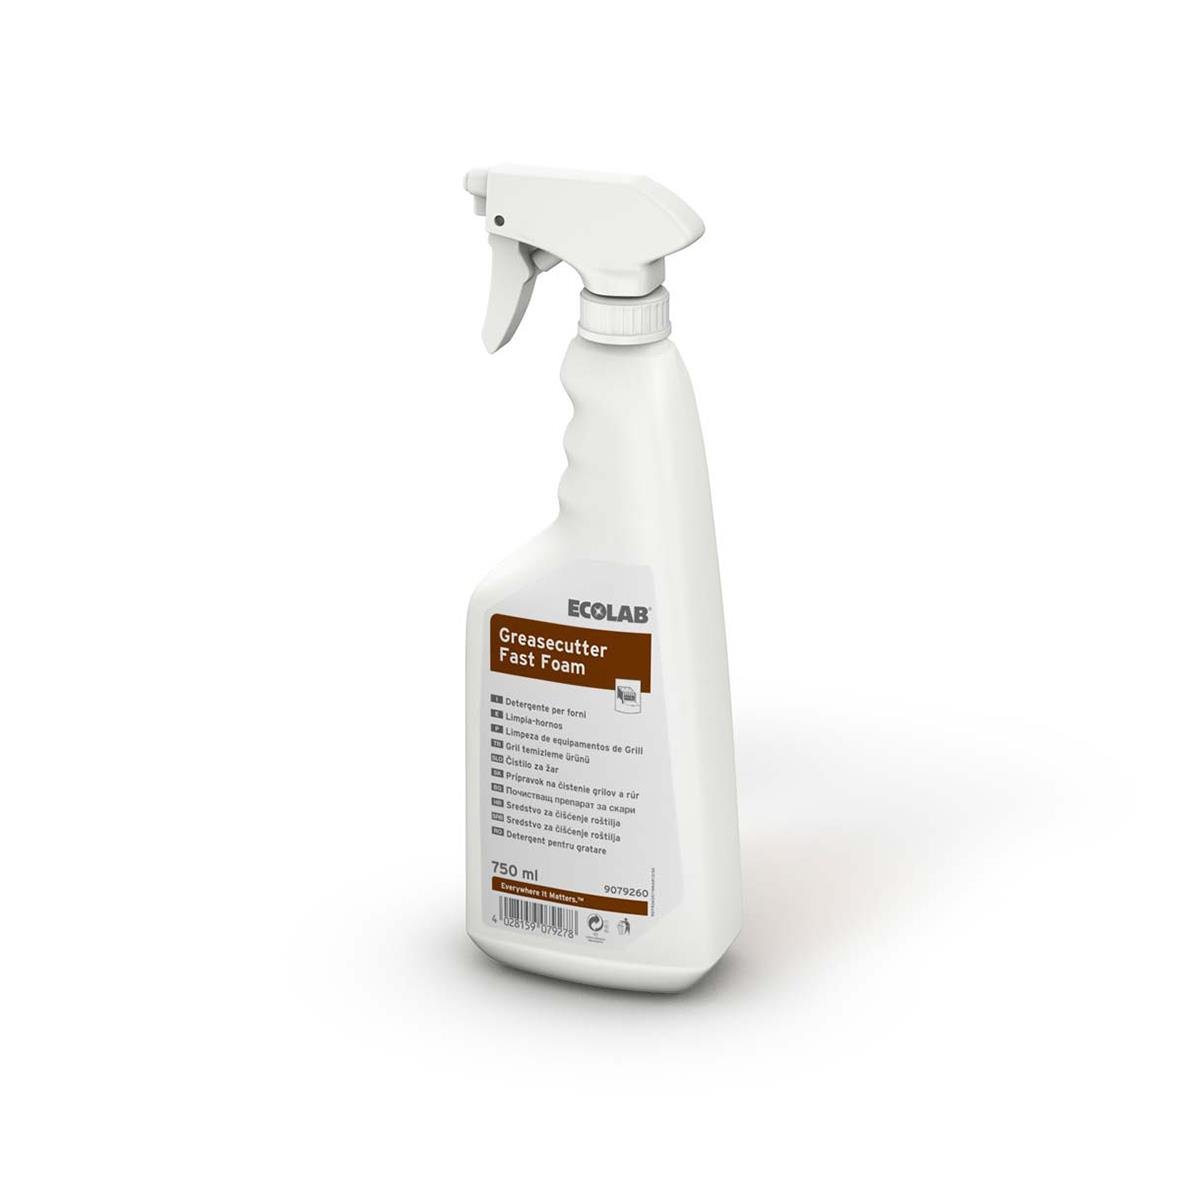 Ugns-/Grillrent Ecolab Greasecutter Foam Spray 750ml 52300044